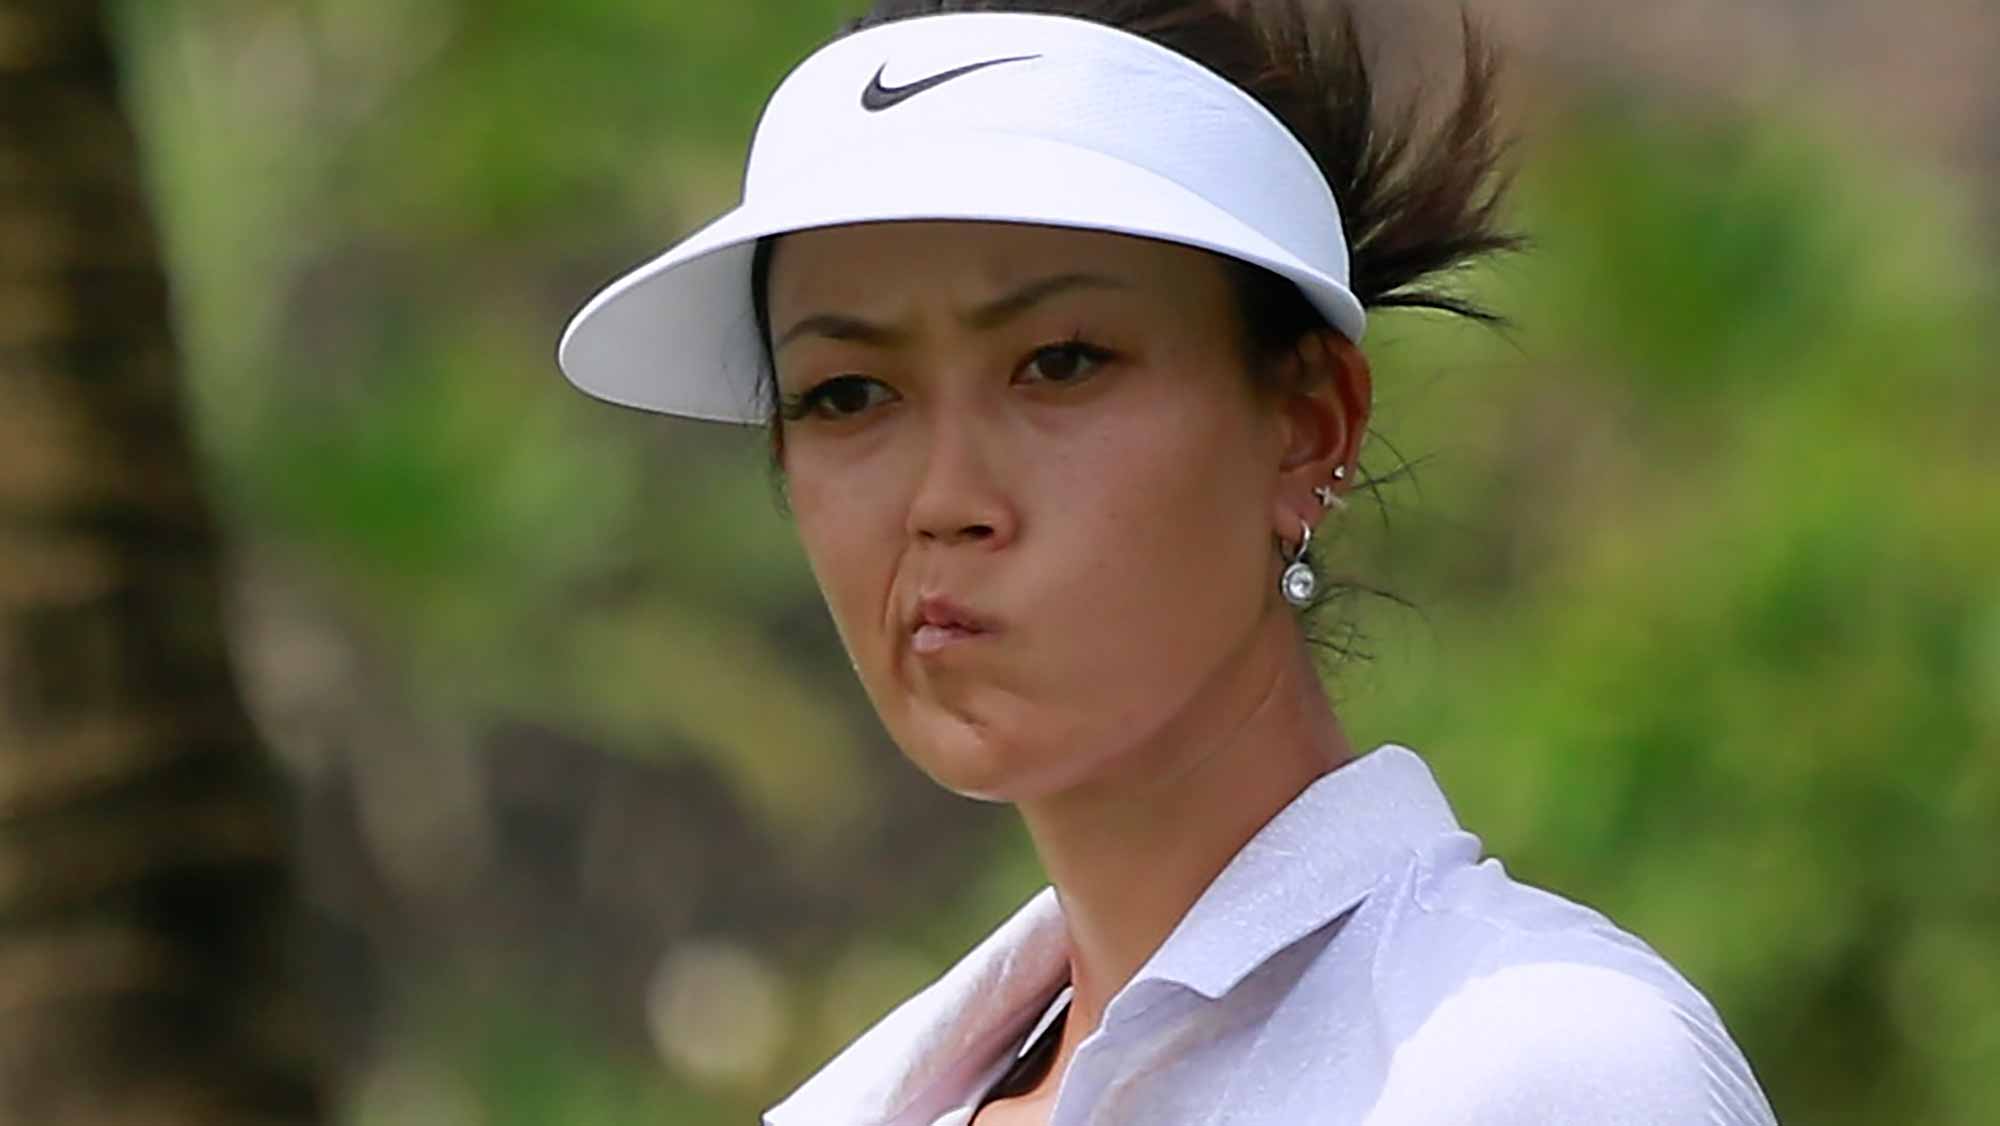 Michelle Wie of United States reacts after her putt at her putt at 18th hole during Round 2 of Blue Bay LPGA